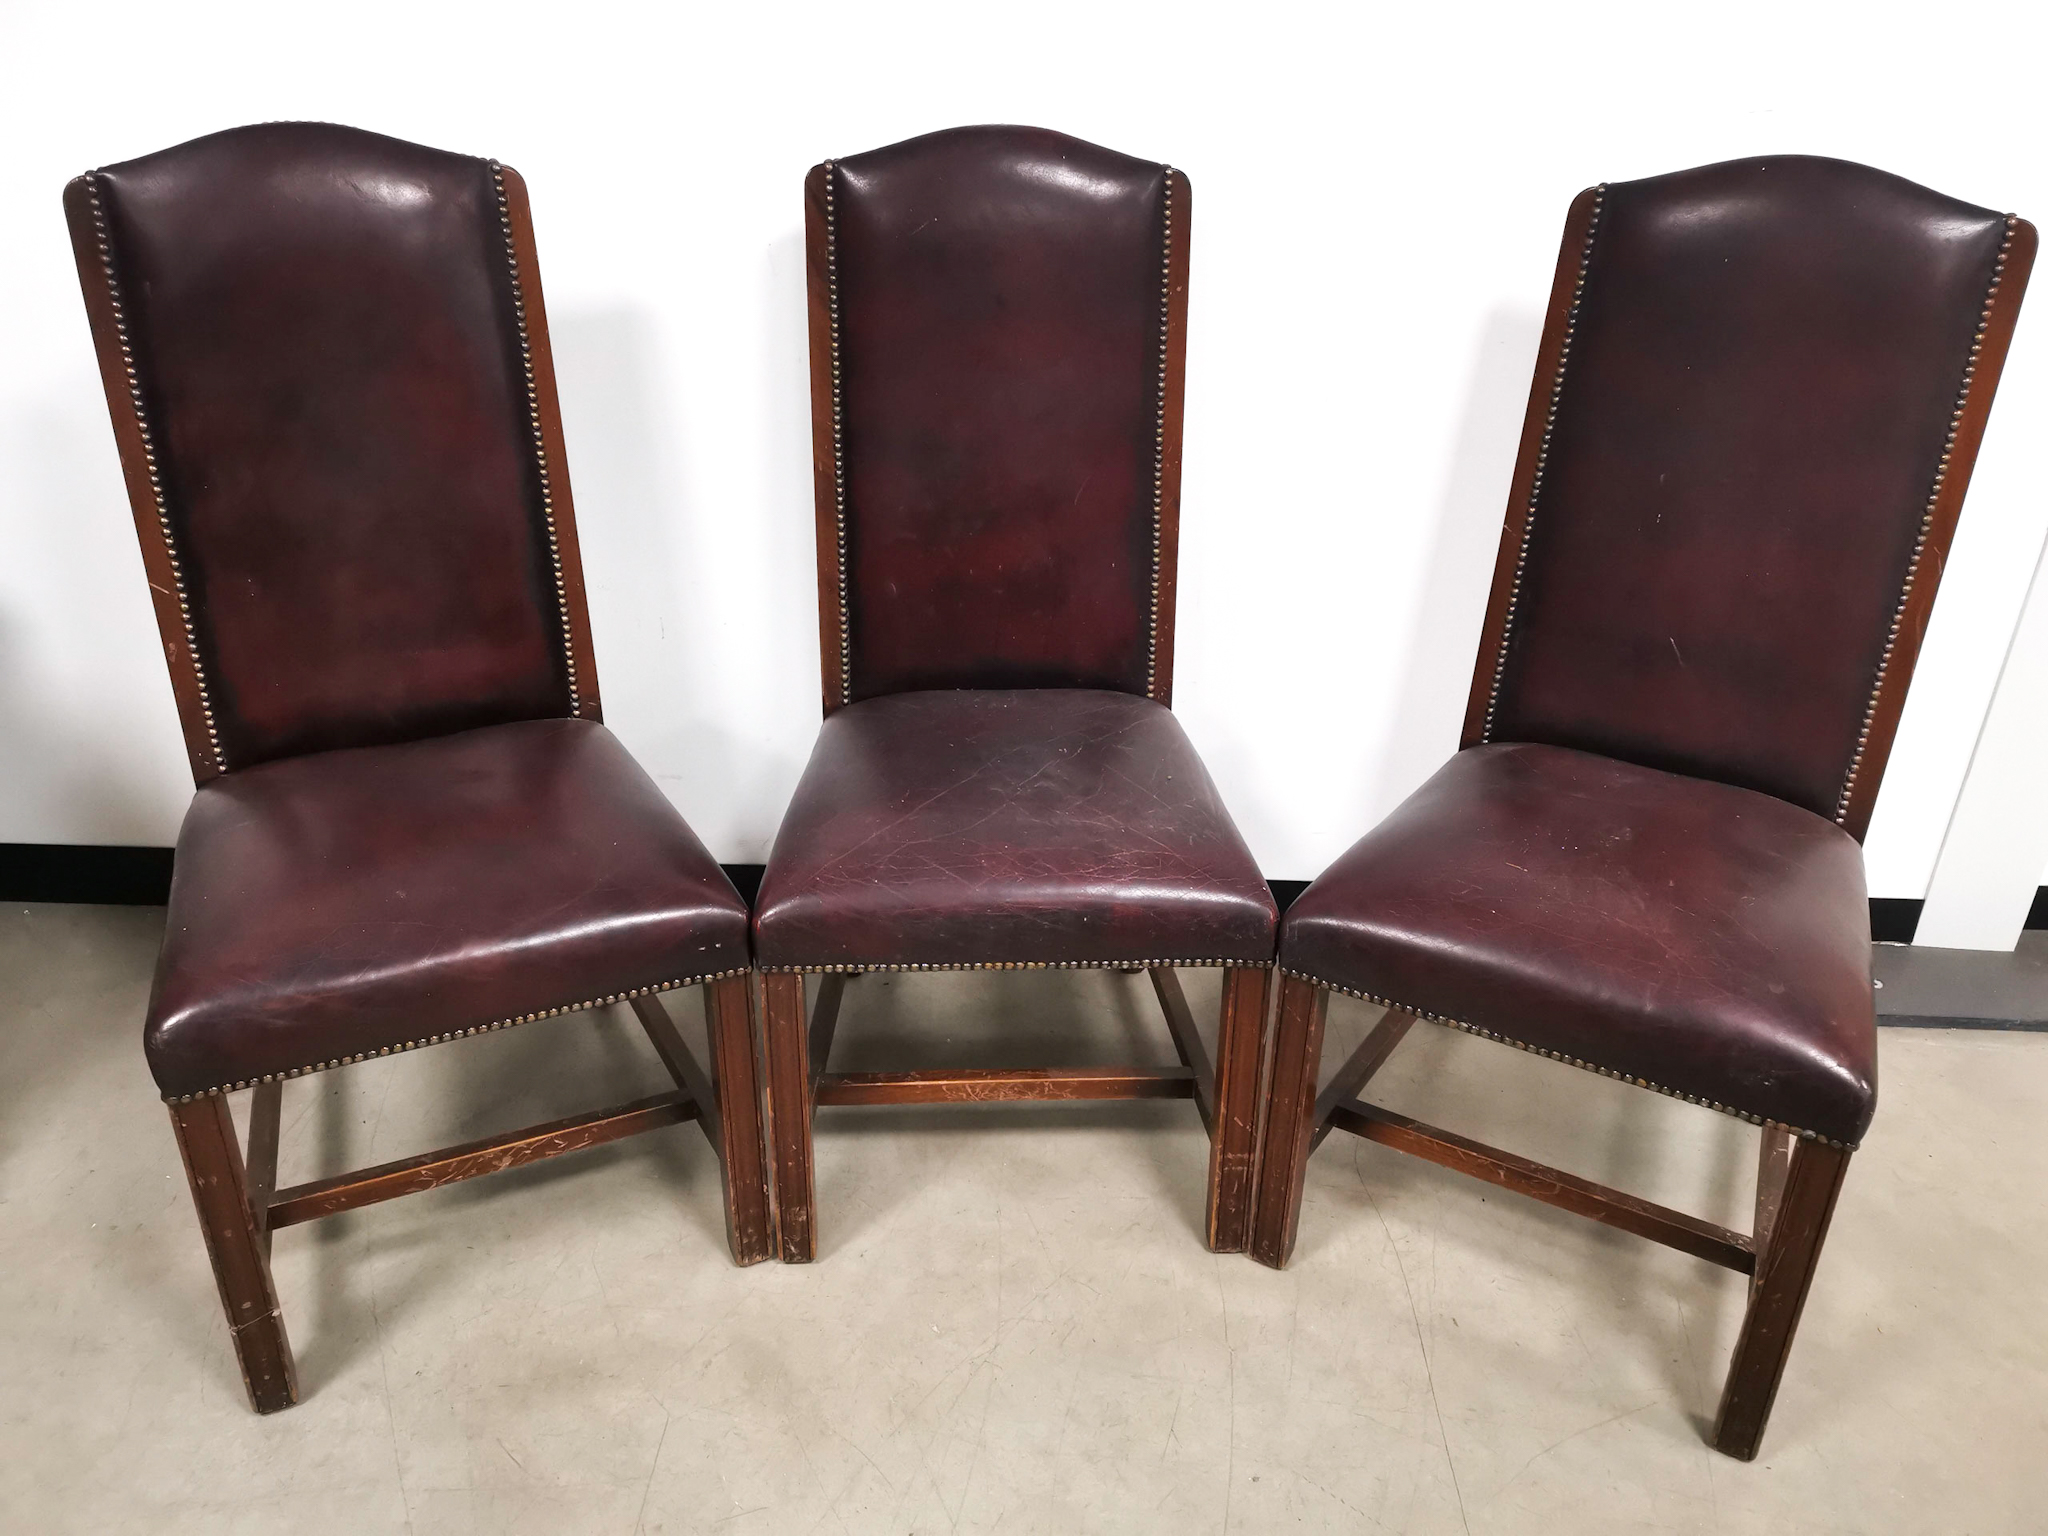 Set of four modern dark red leatherette chairs, 53cm W x 57cm D x 110cm H - Image 3 of 4